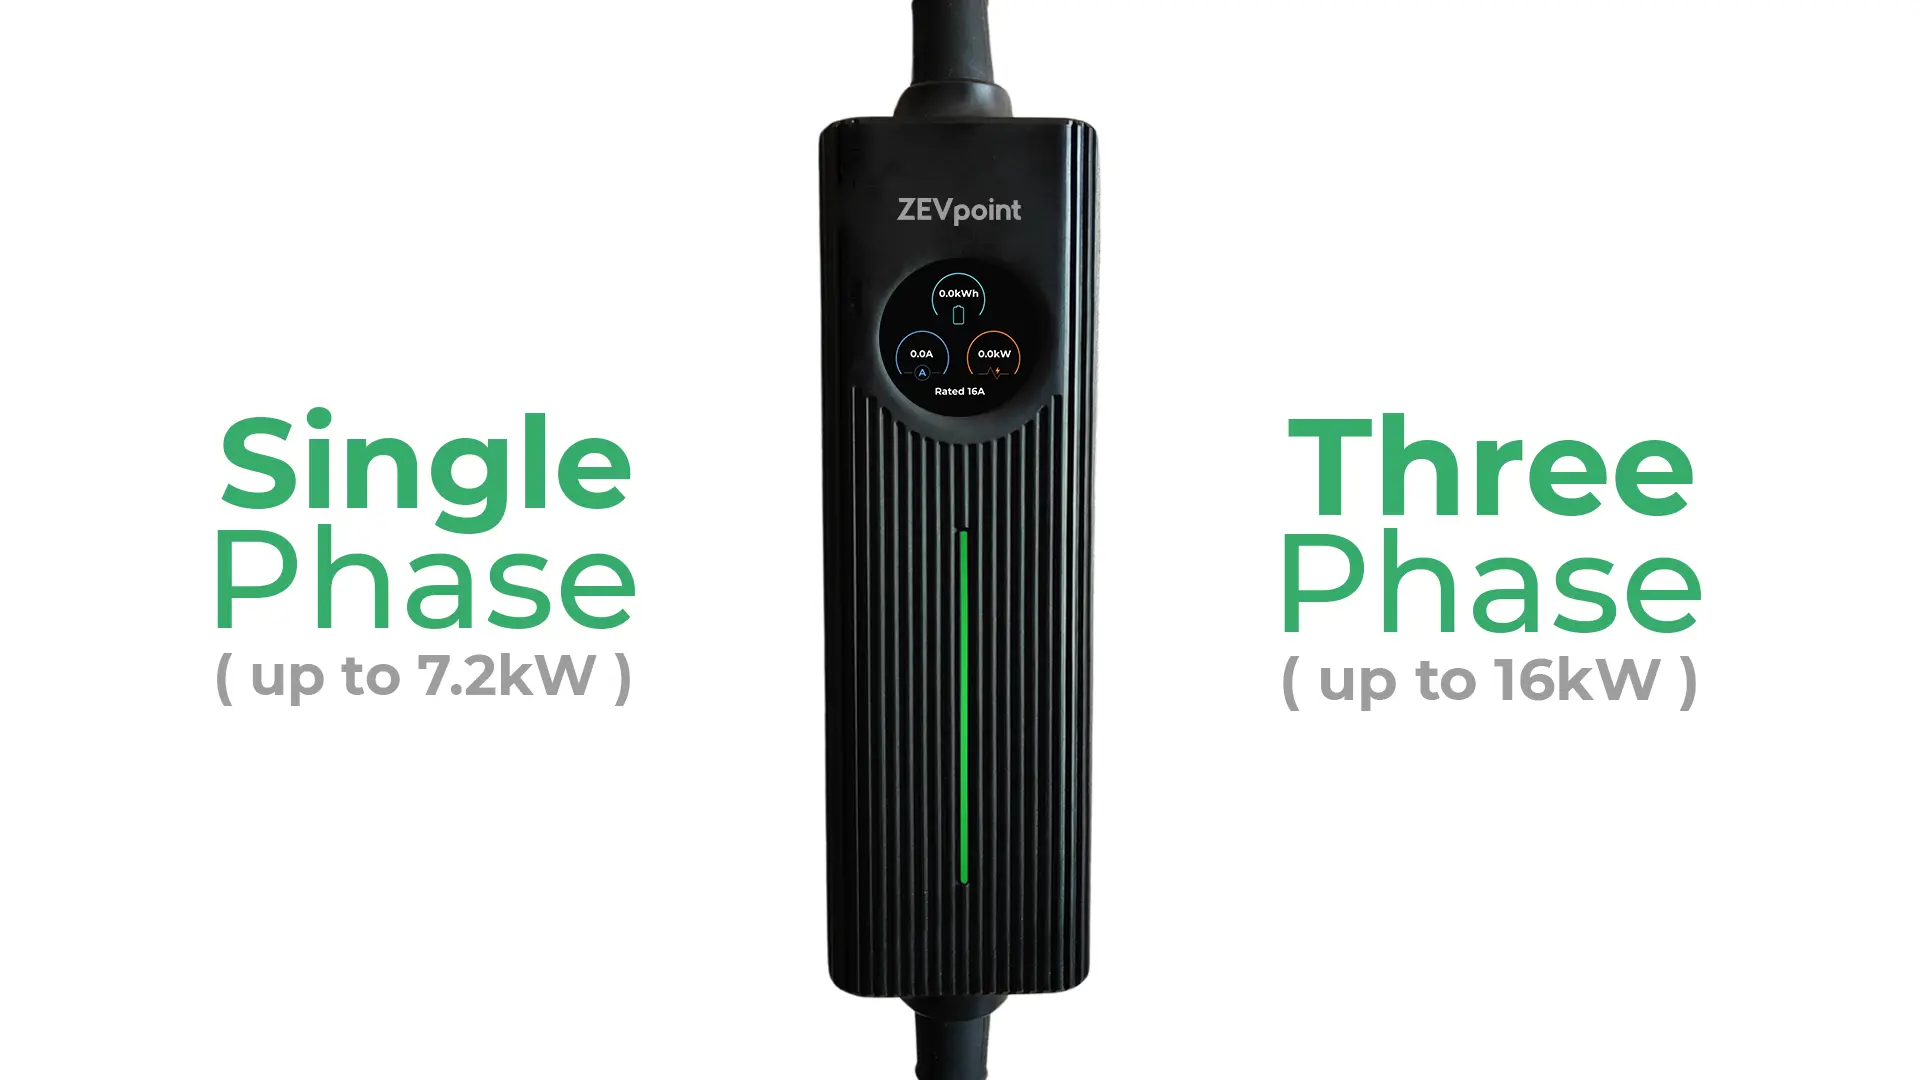 Zevpoint India's first multi phase EV charger